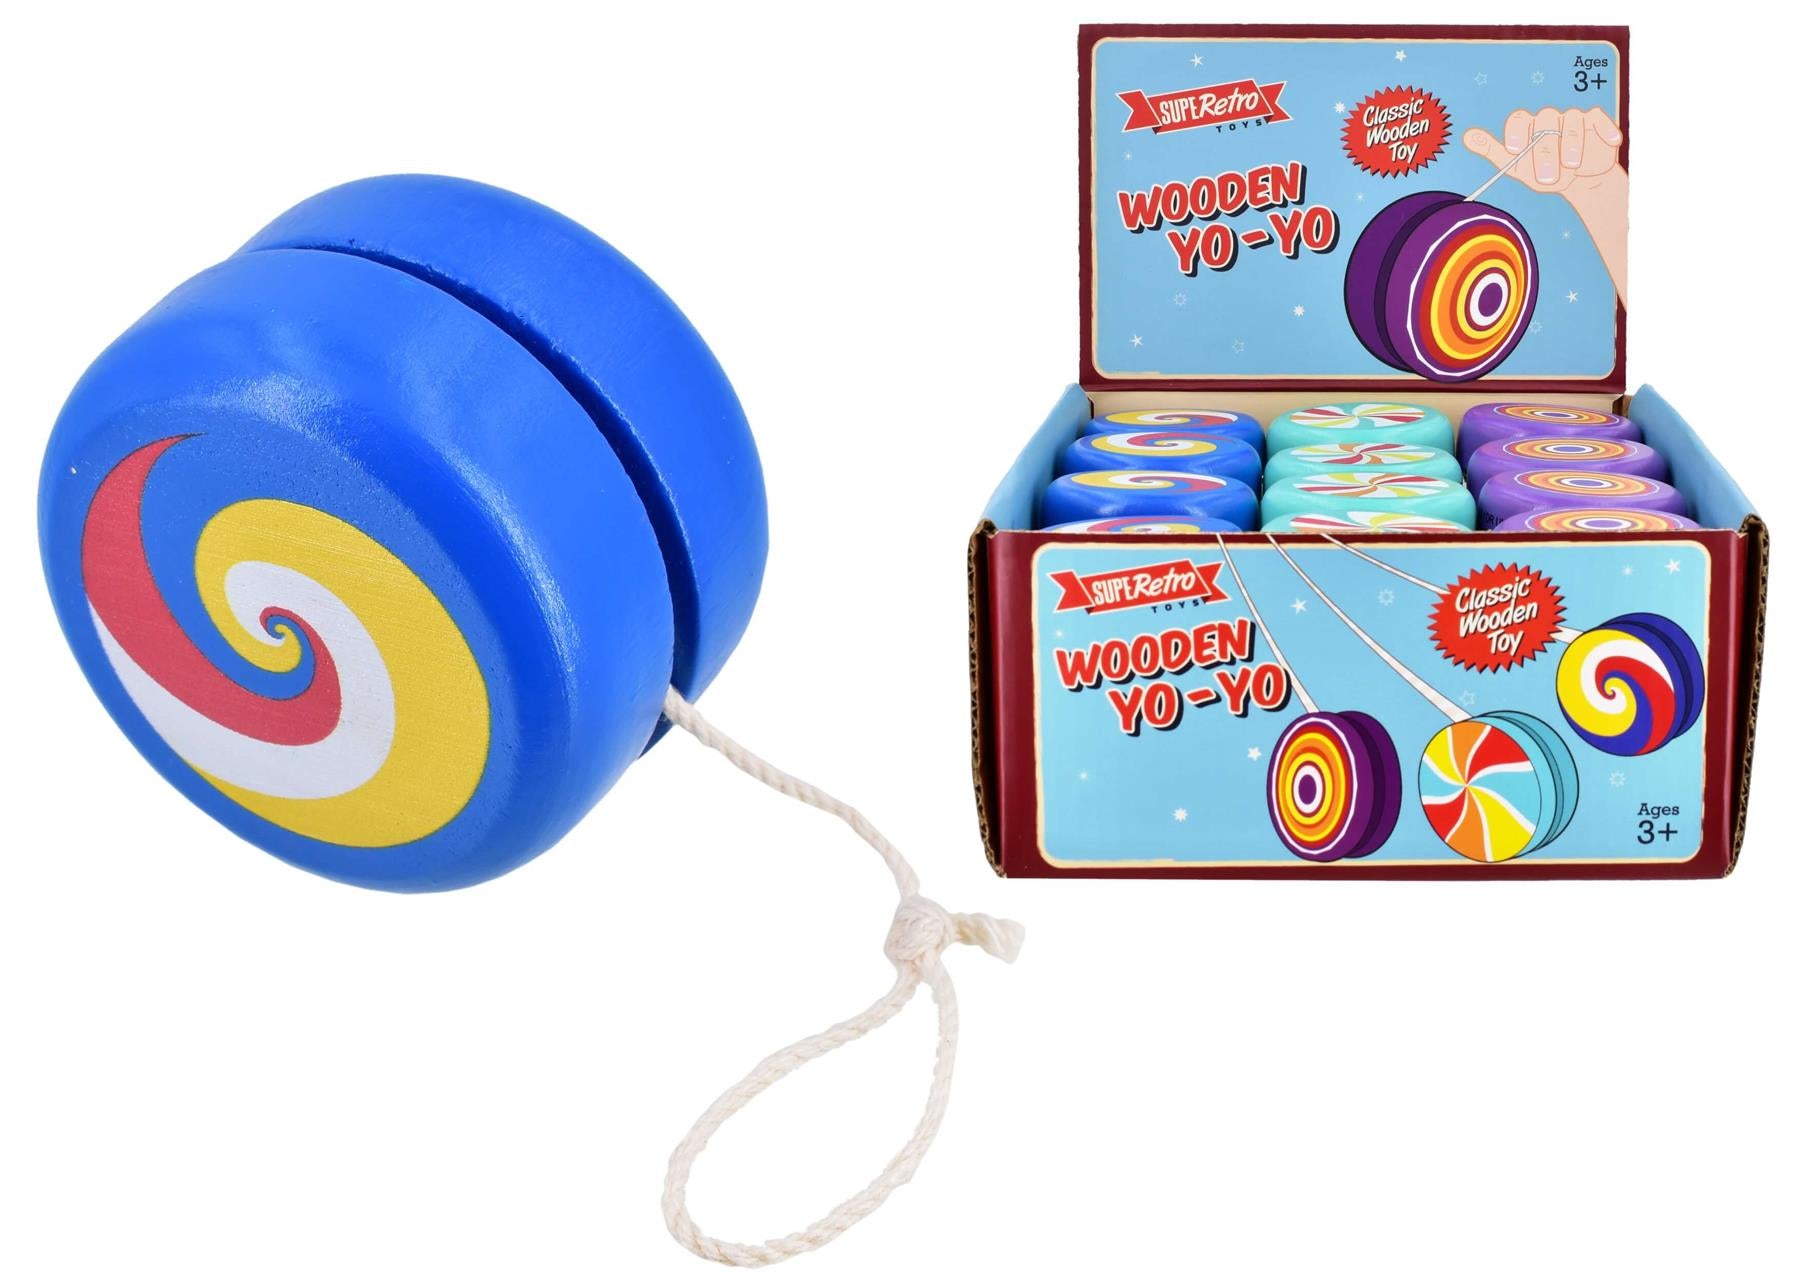 Colourful Patterned Retro Wooden Yoyo in Assorted Designs